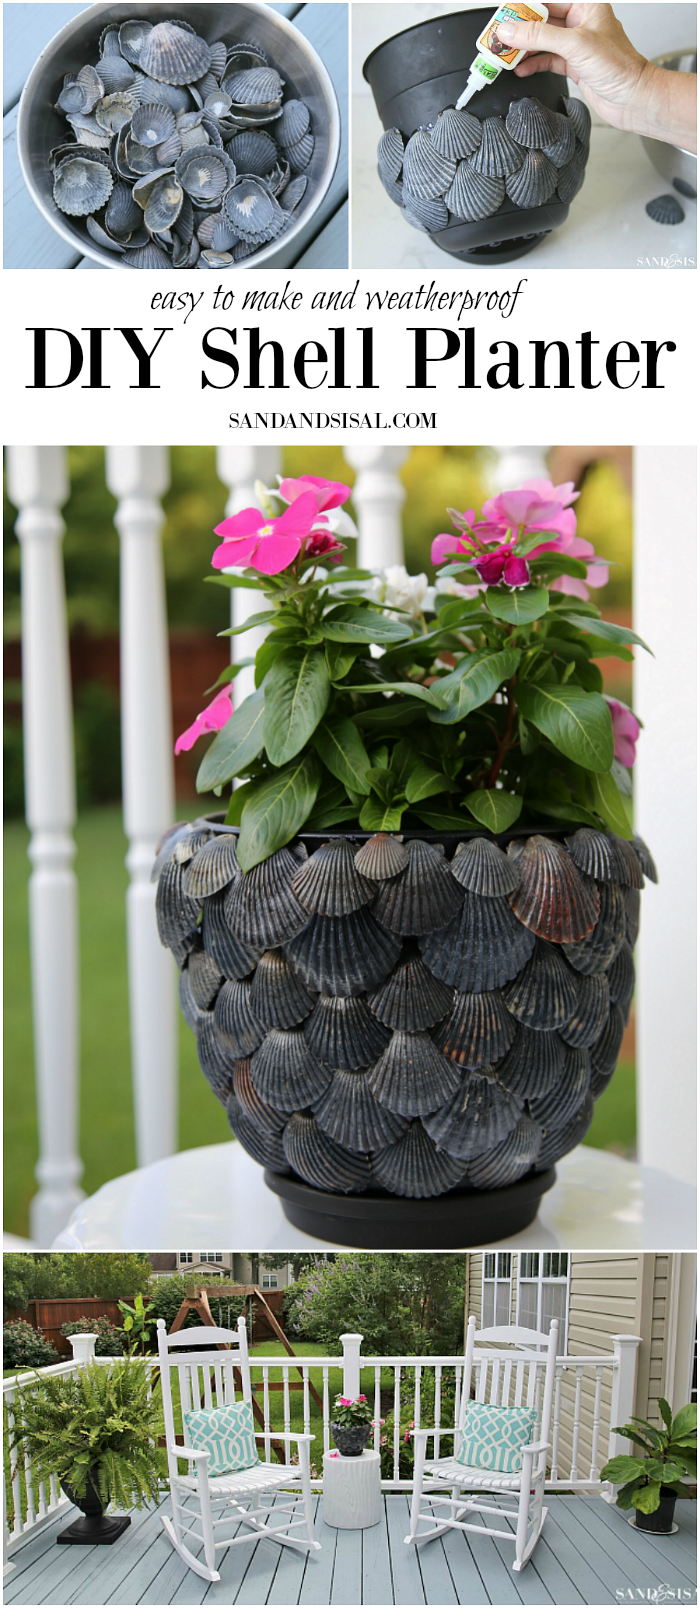 How to Use a Seashell As a Planter : 8 Steps - Instructables